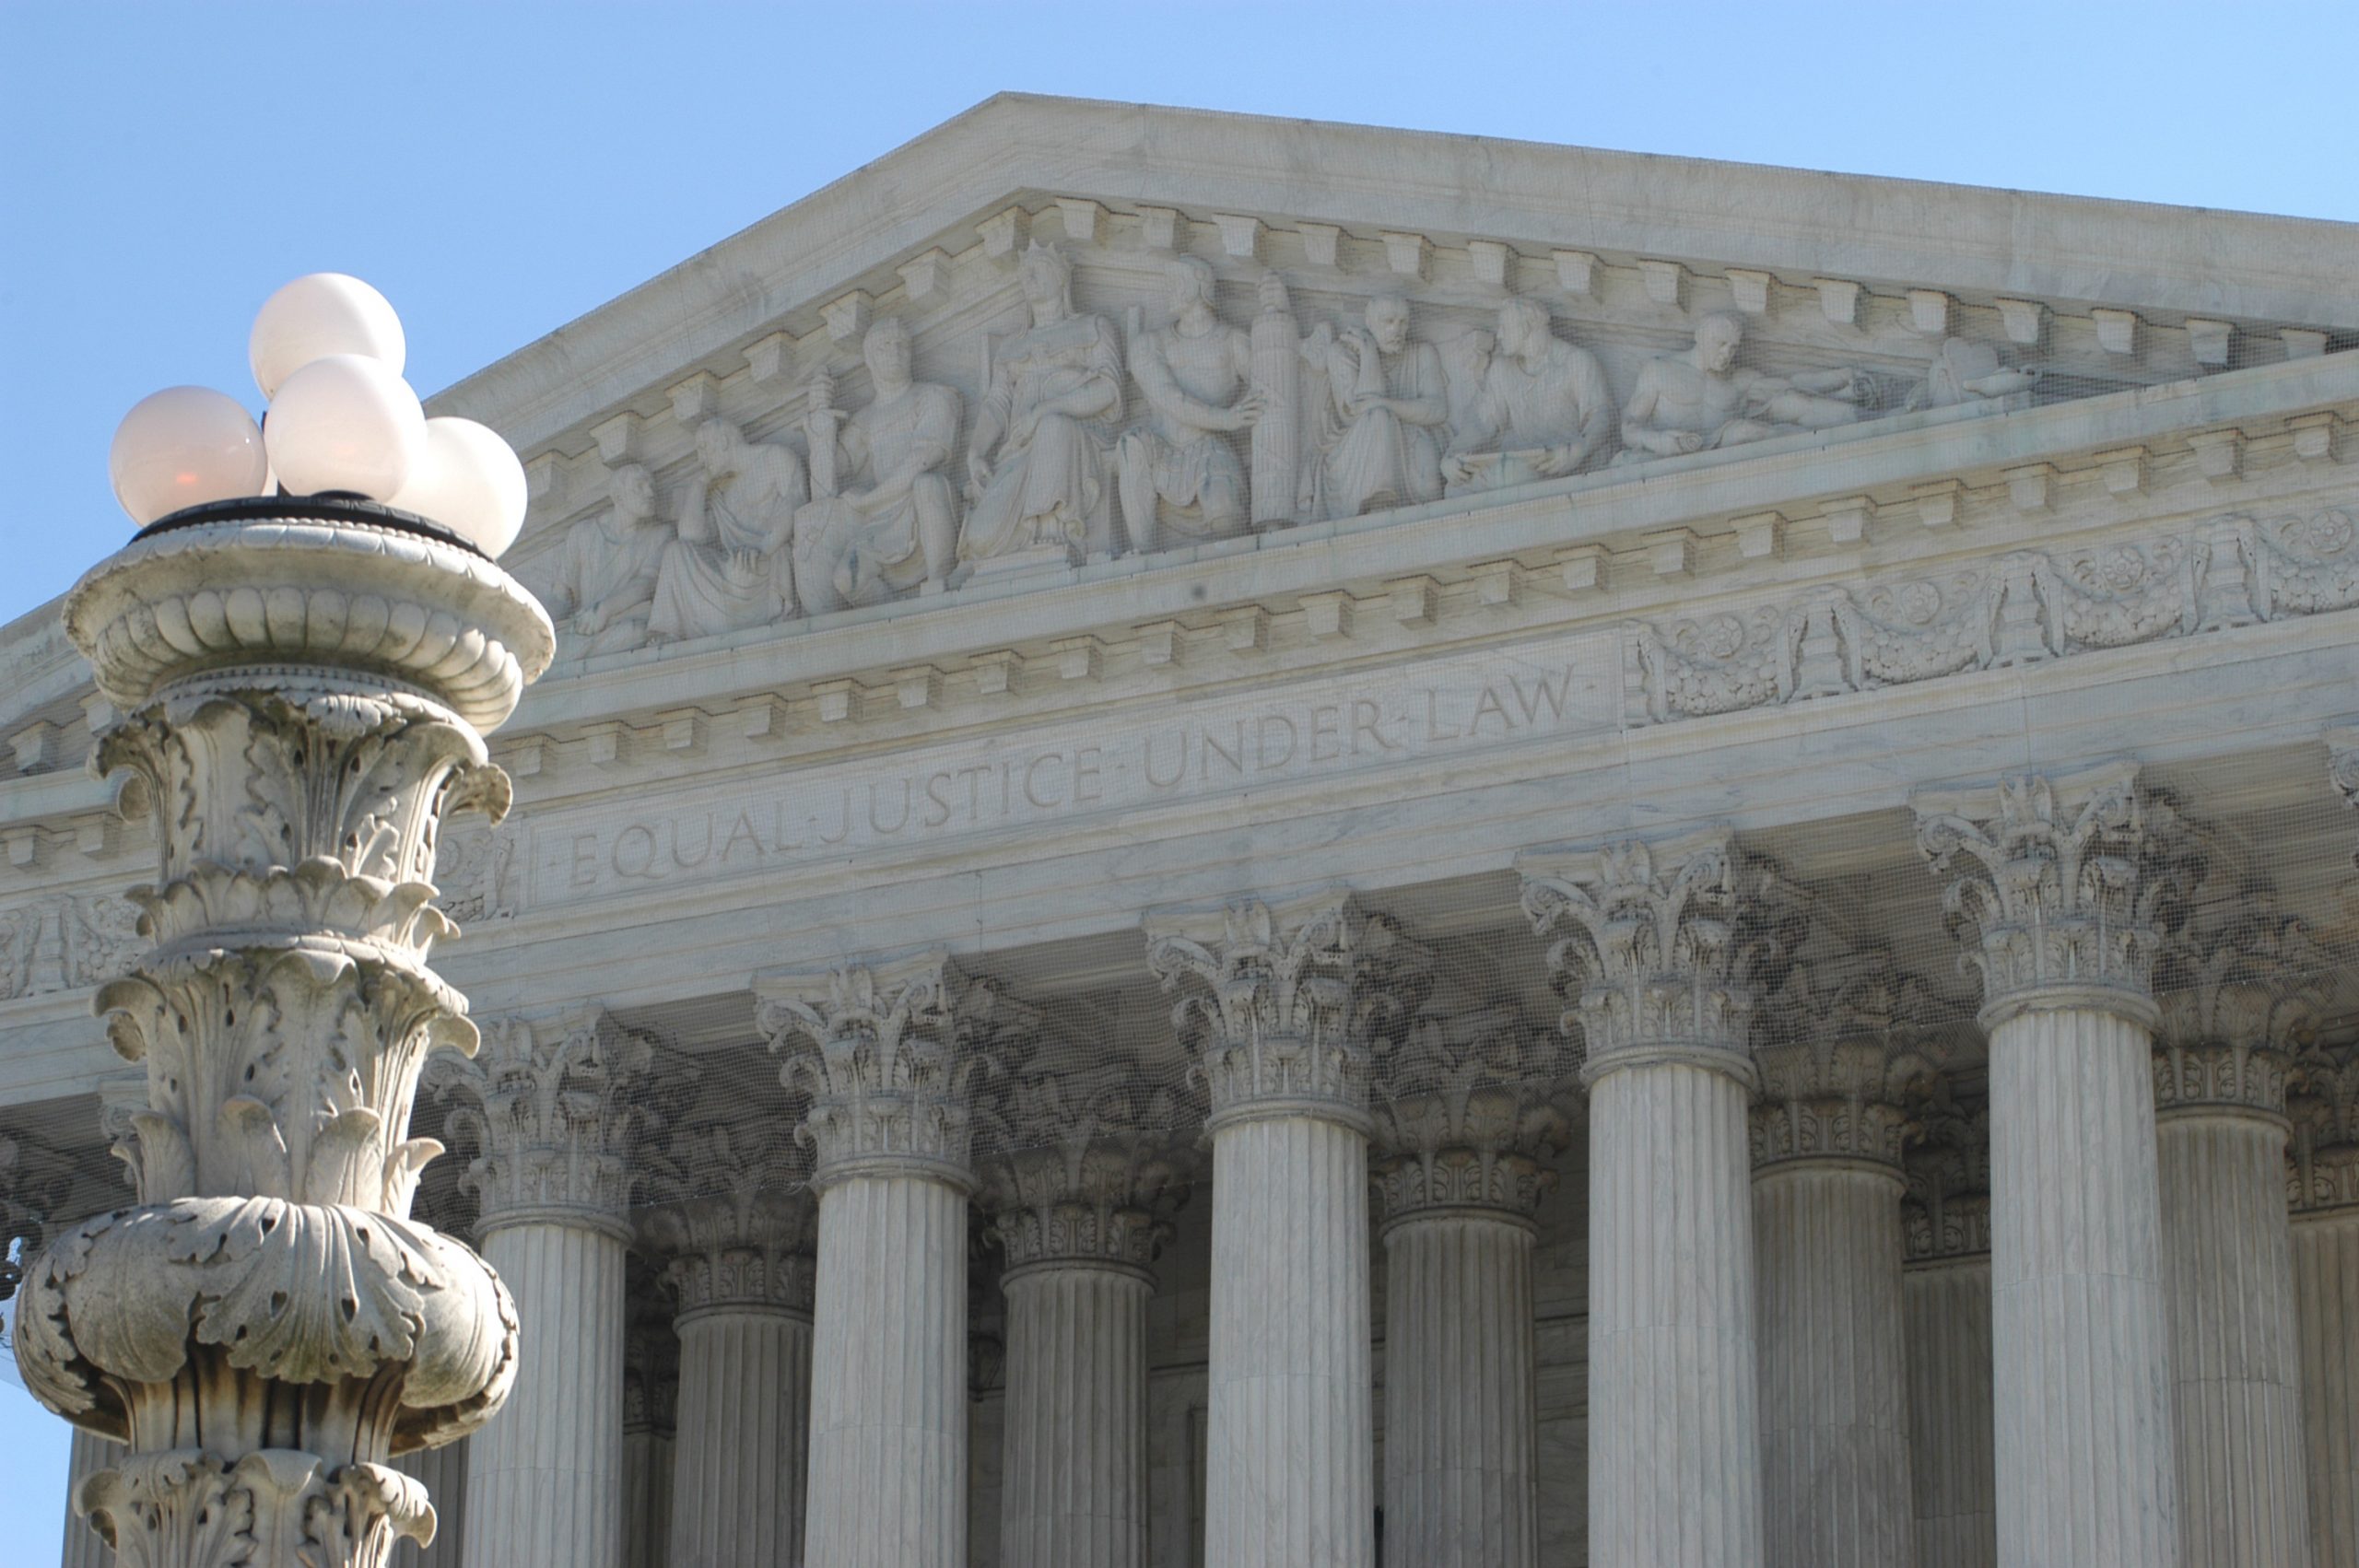 7 Things You Might Not Know About the US Supreme Court